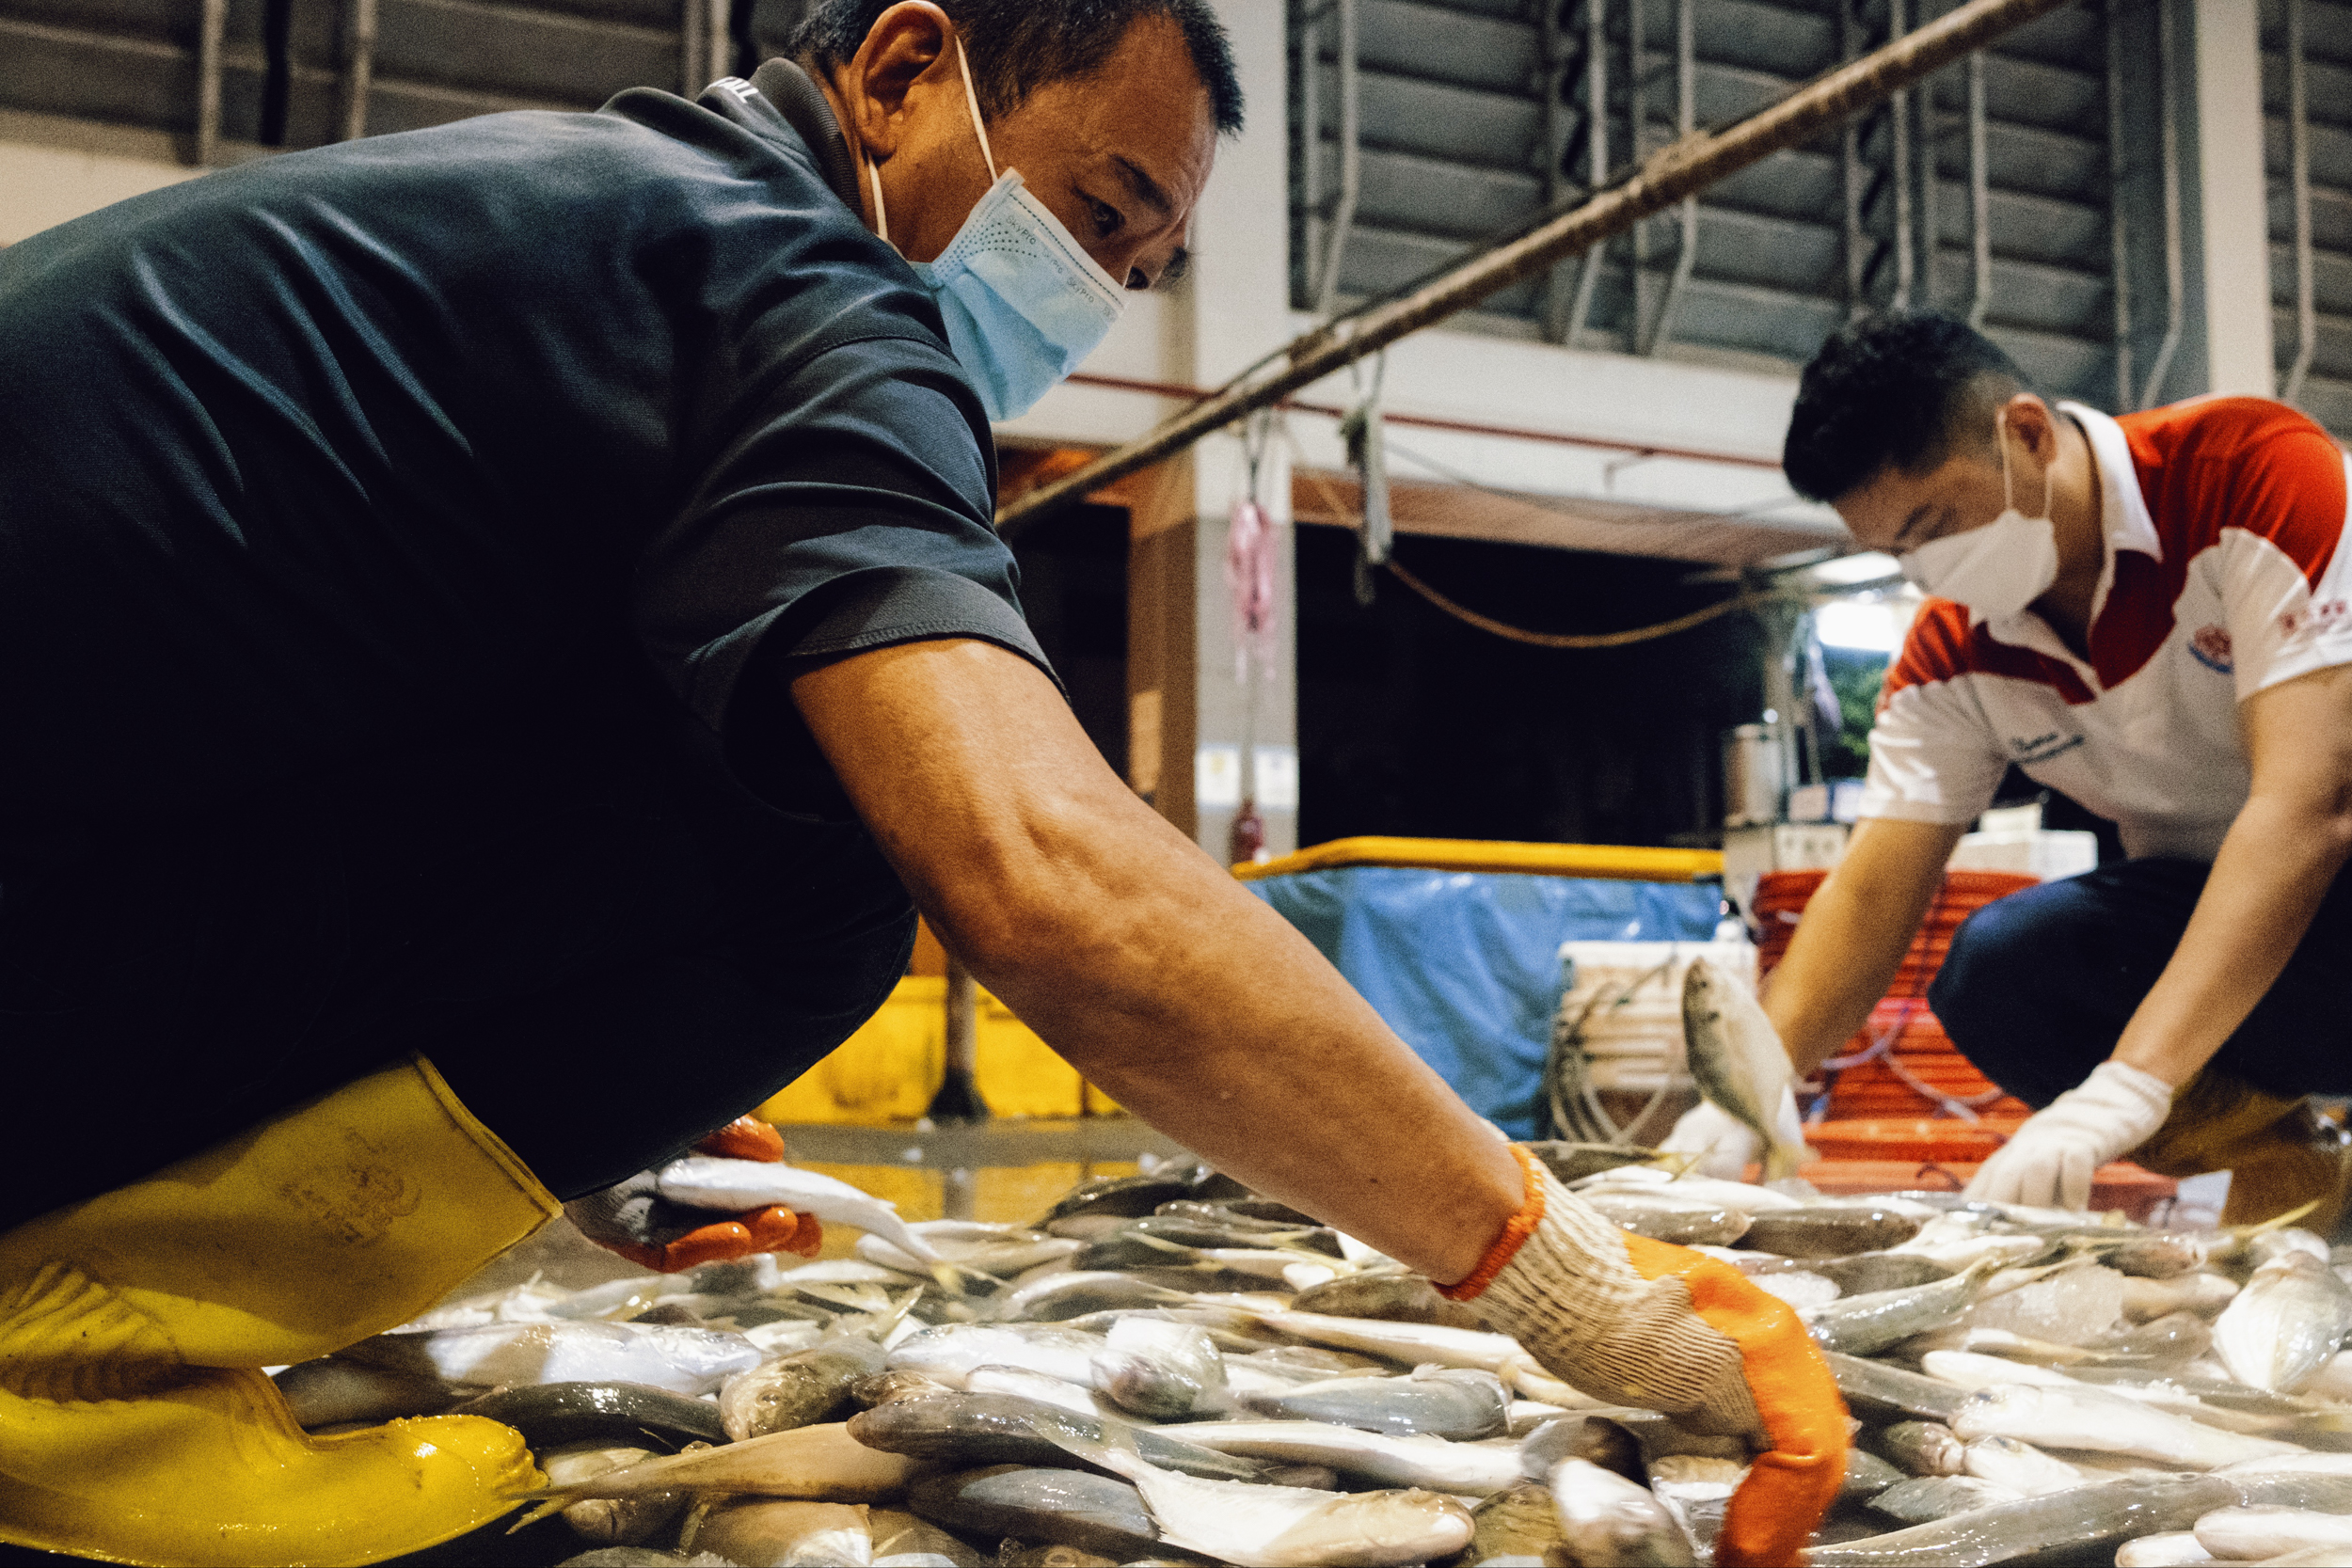 Workers sort the fishes into baskets.